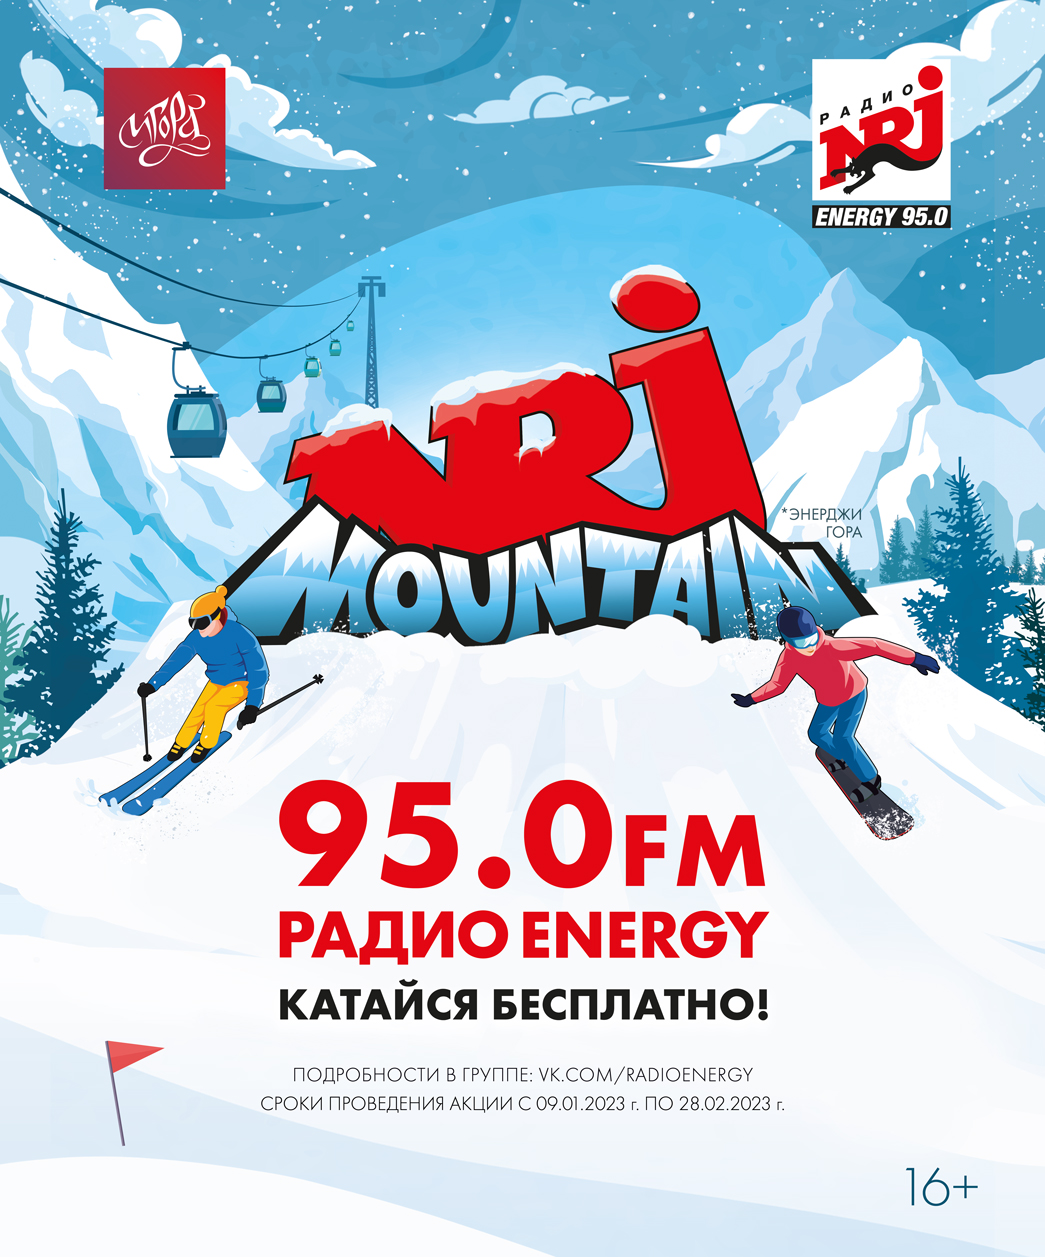 ENERGY in the MOUNTAIN 2023